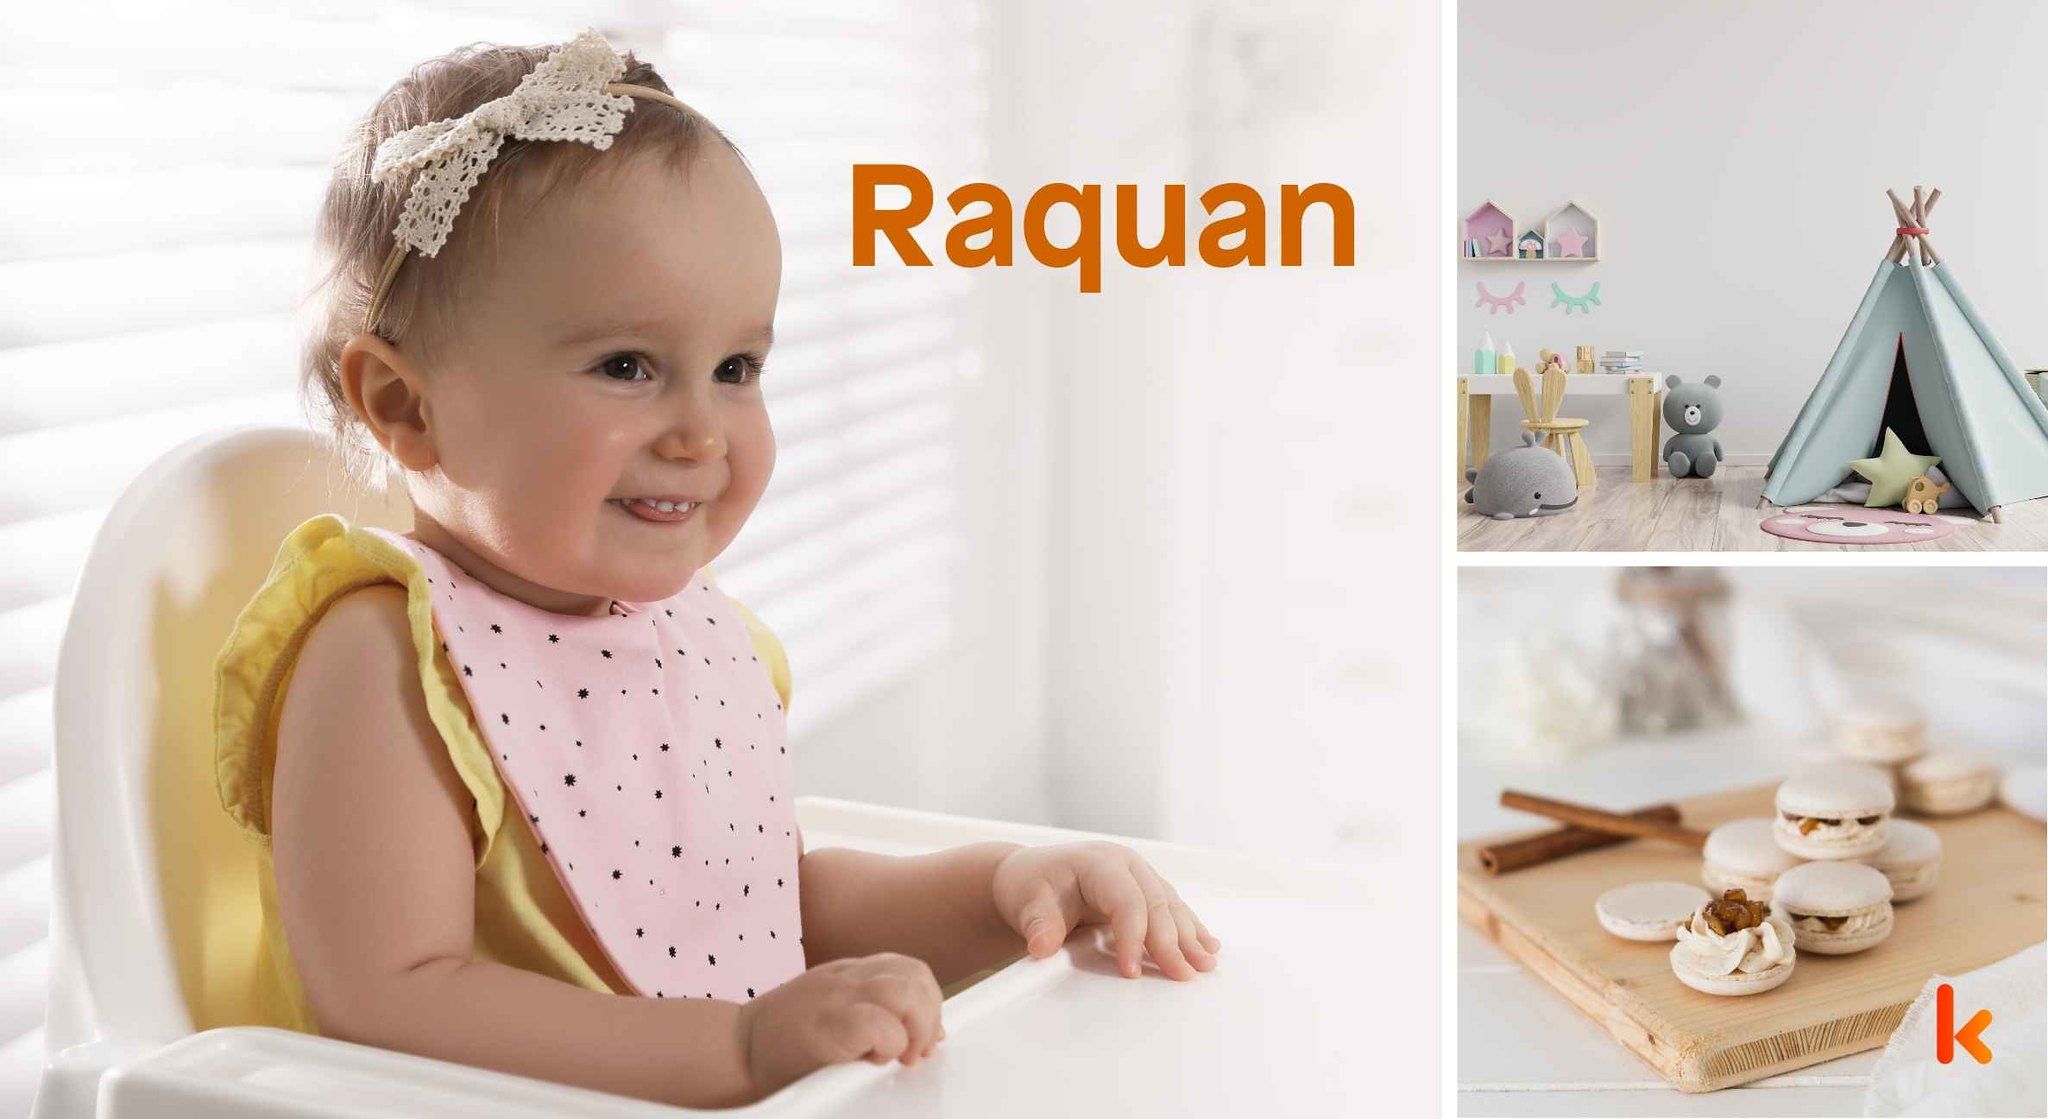 Meaning of the name Raquan